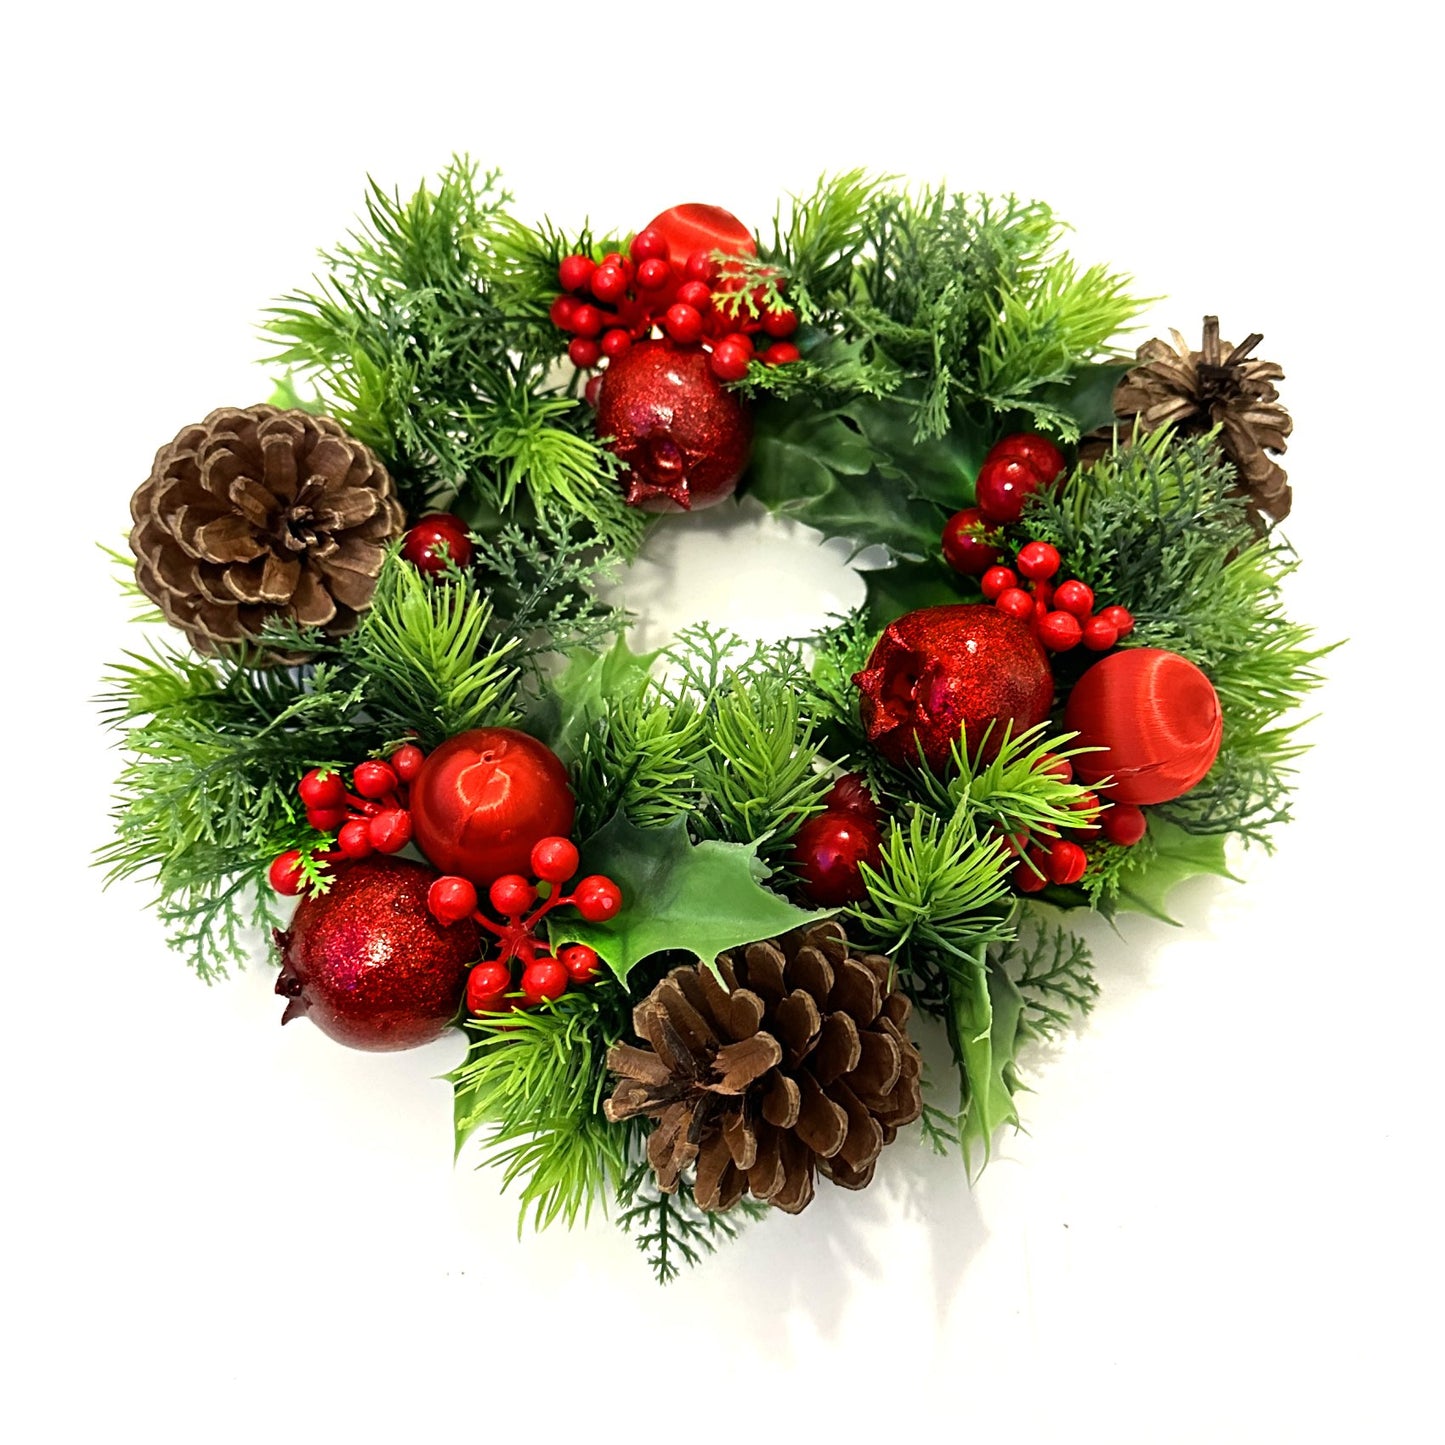 25cm Artificial Pine Wreath With Baubles, Pomegranates and Pinecones